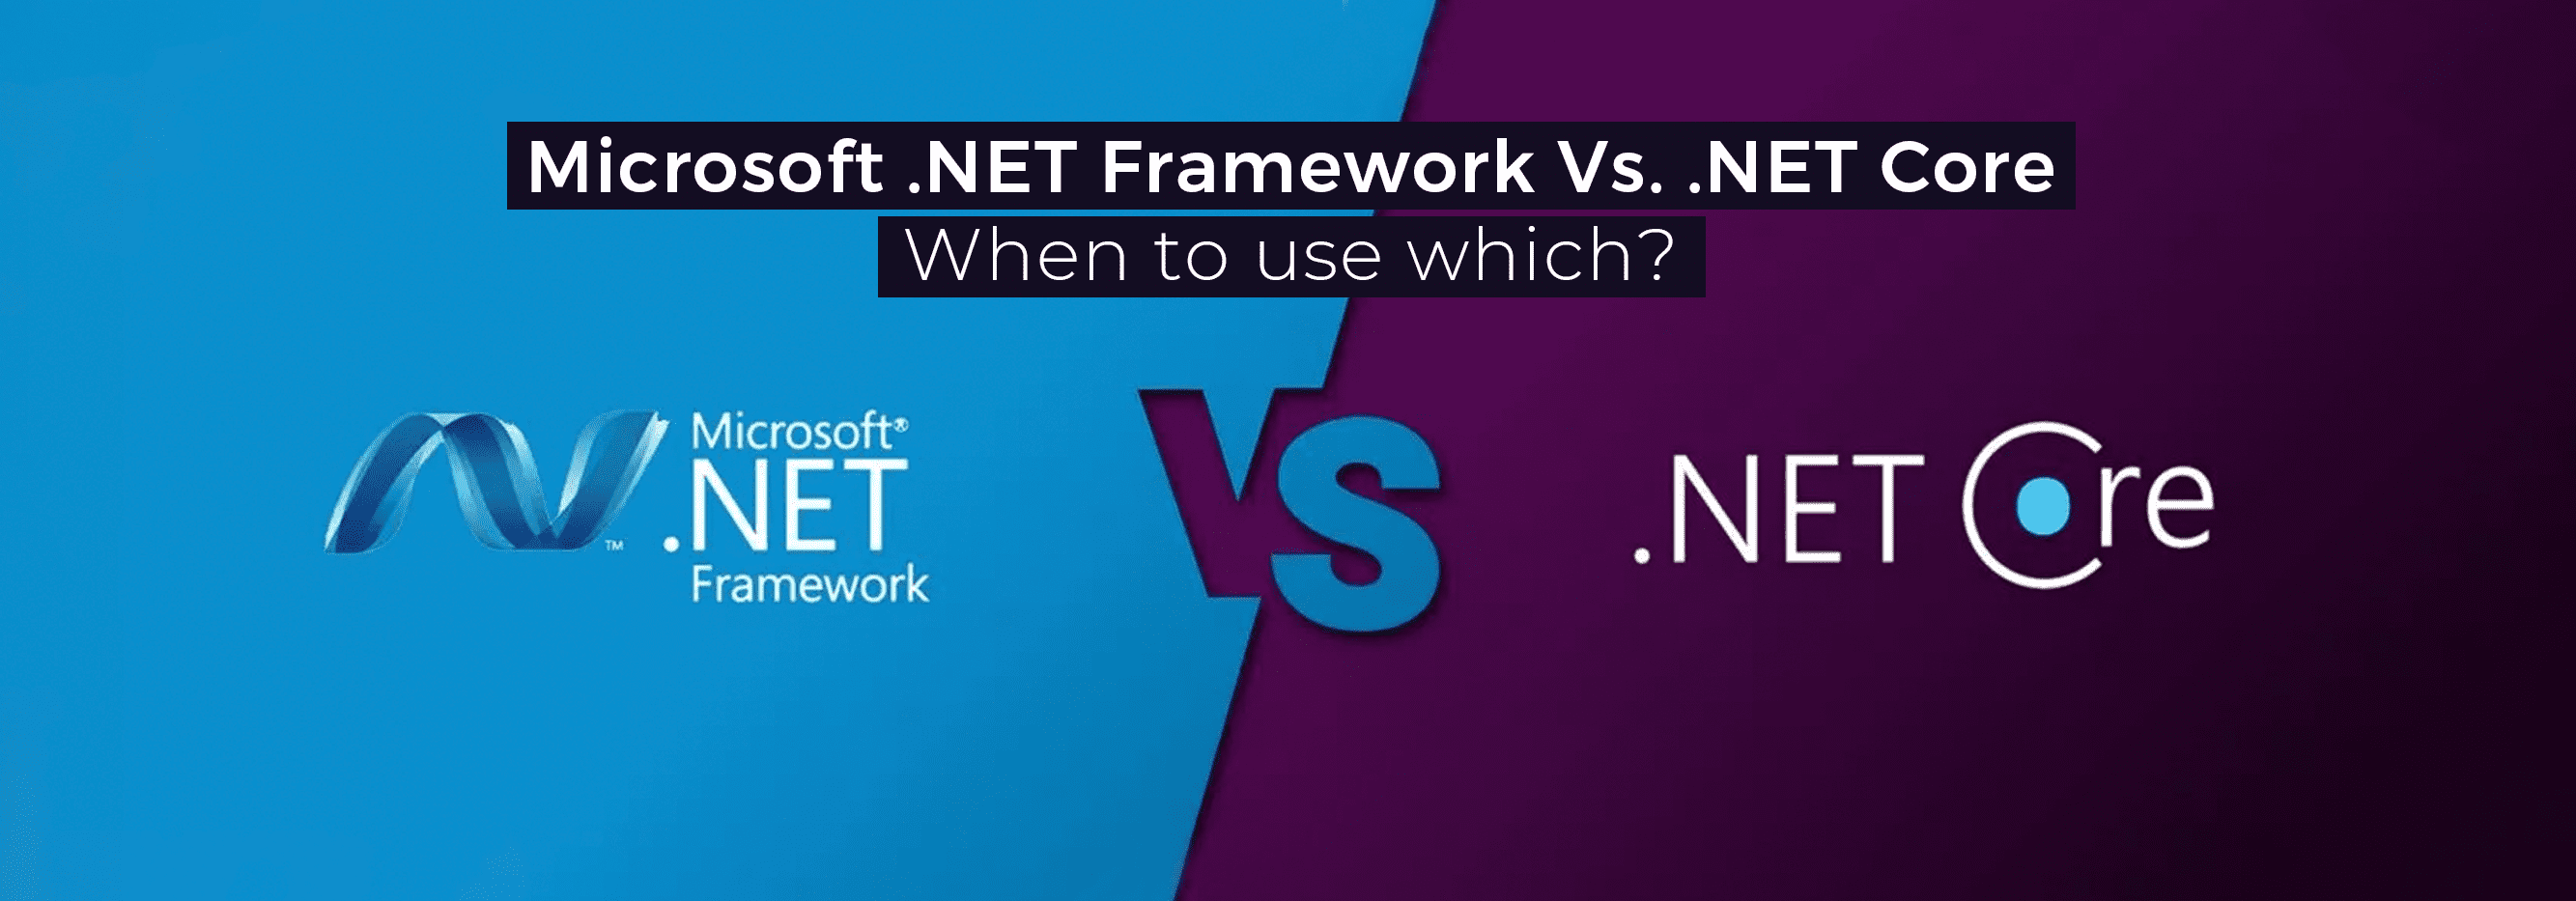 Microsoft .NET Framework Vs. .NET Core When to use which_banner